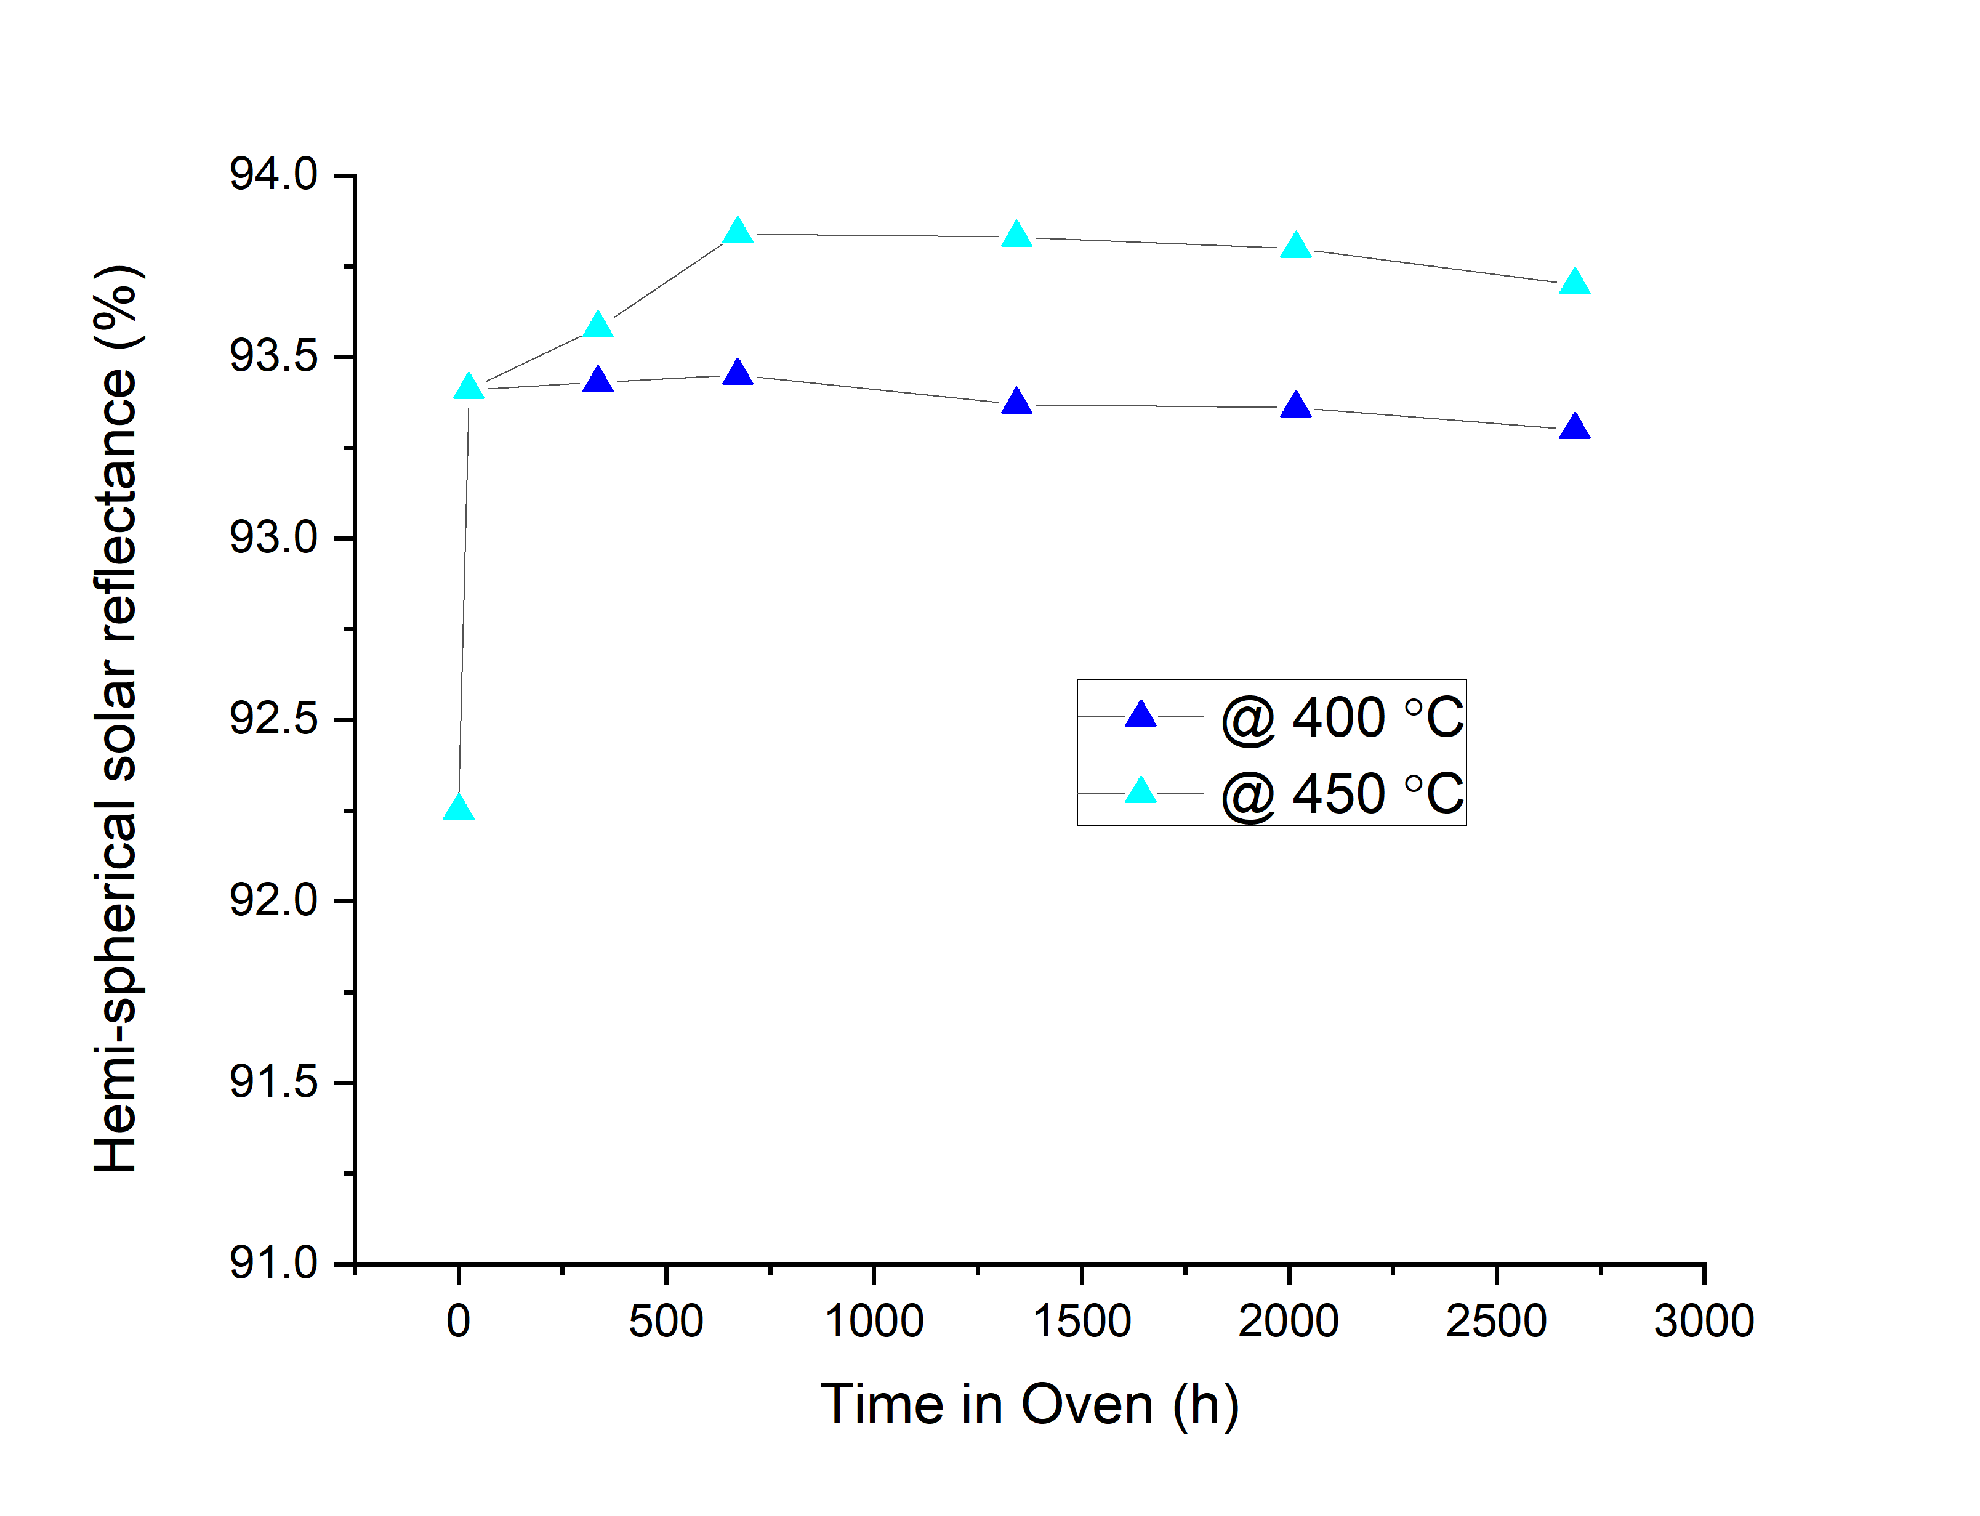 solar reflectance versus time in 400 C or 450 C oven